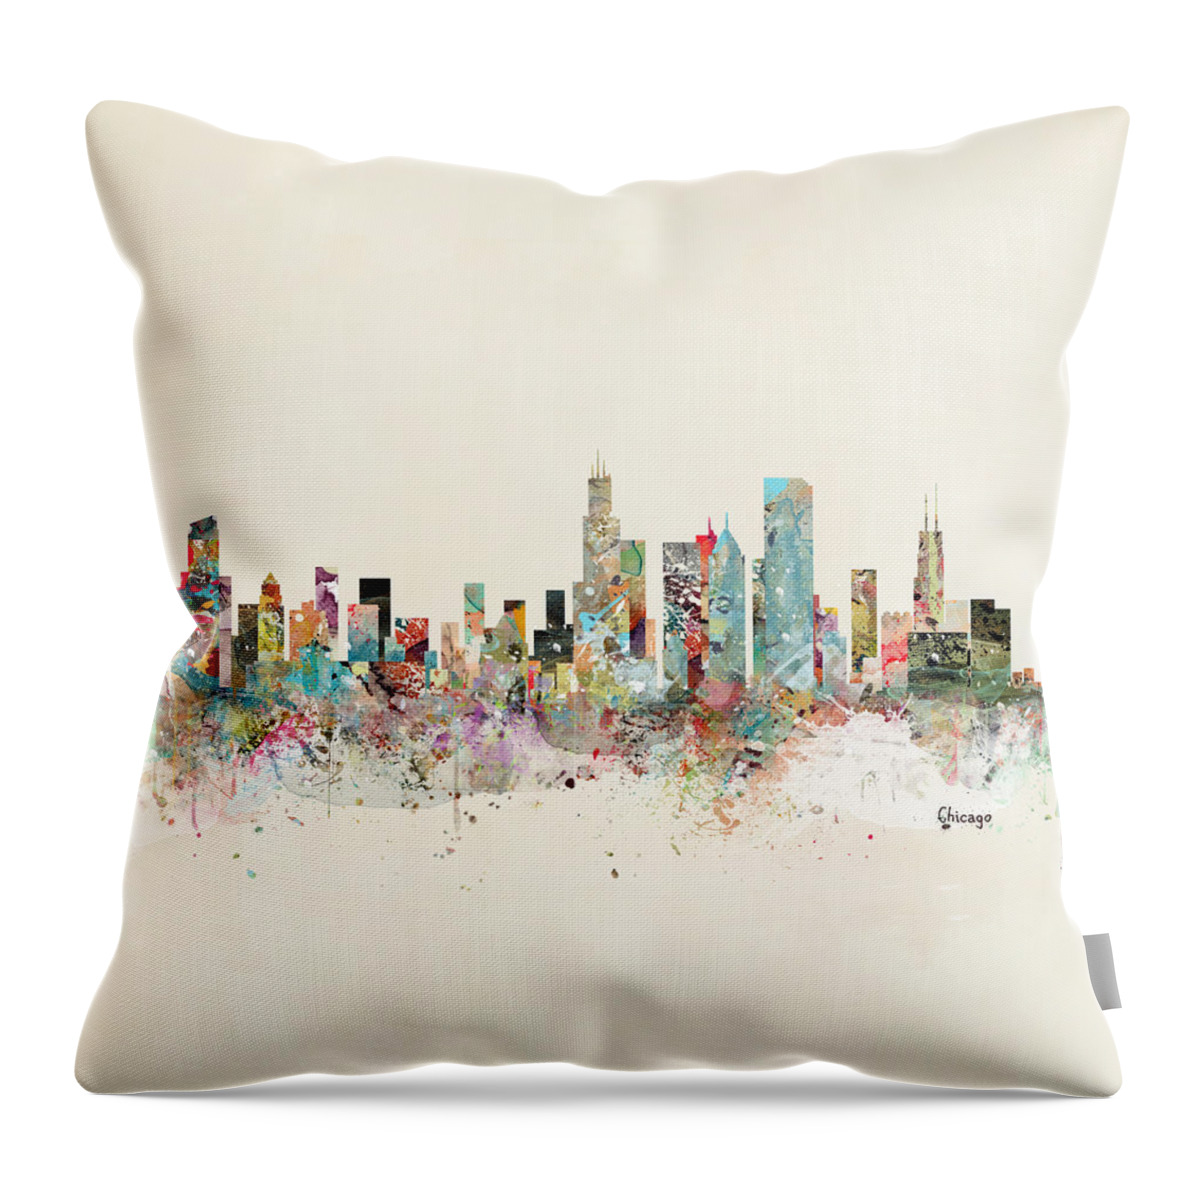 Chicago Throw Pillow featuring the painting Chicago Skyline by Bri Buckley